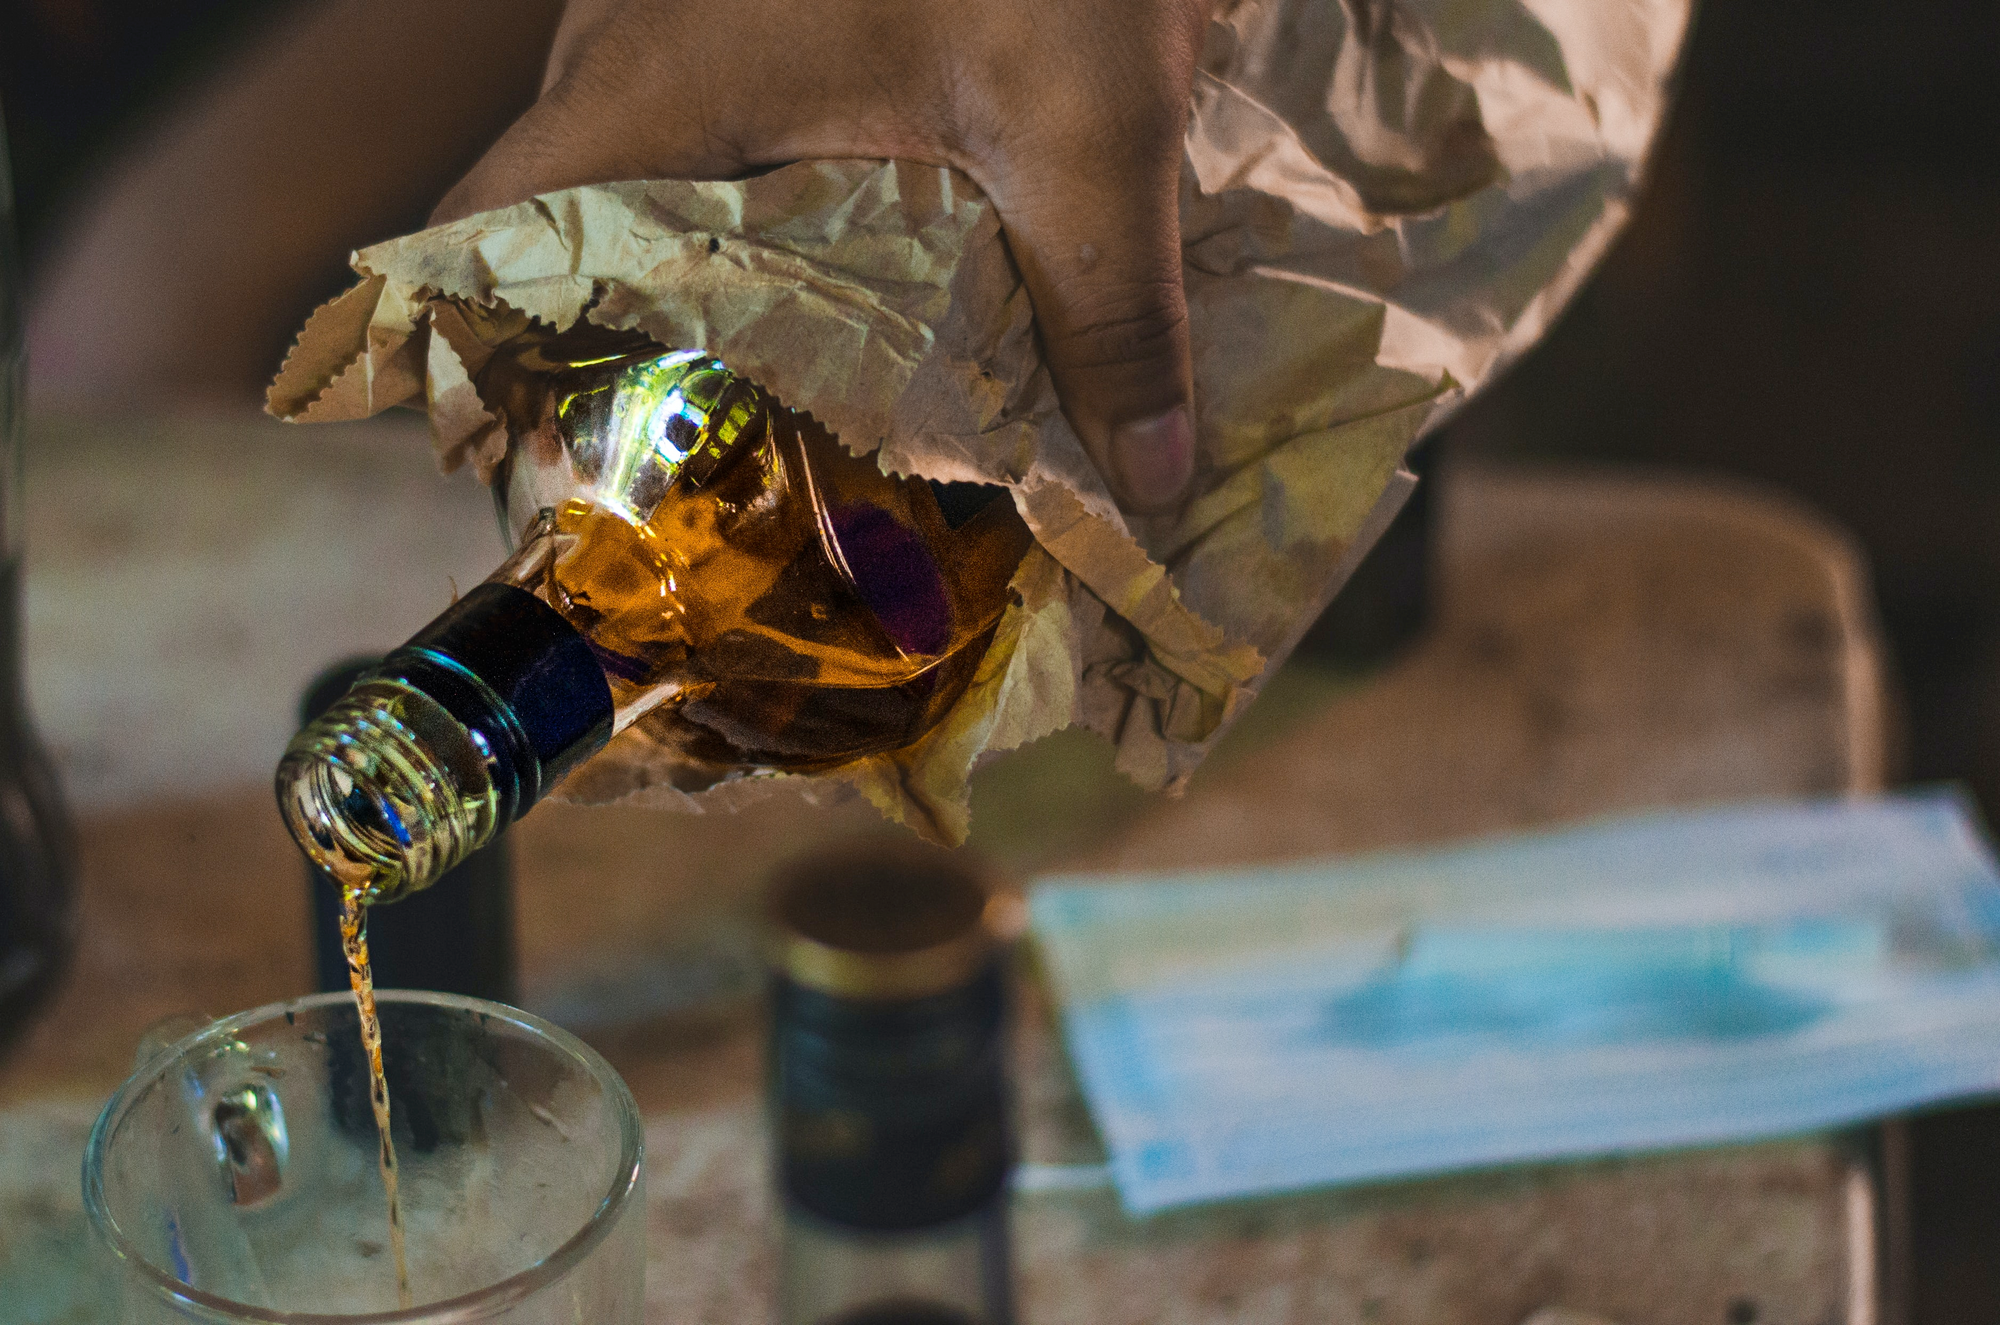 Photo of a hand pouring a bottle of alcohol into a glass. The bottle is inside a paper bag and there is a medical mask in the background